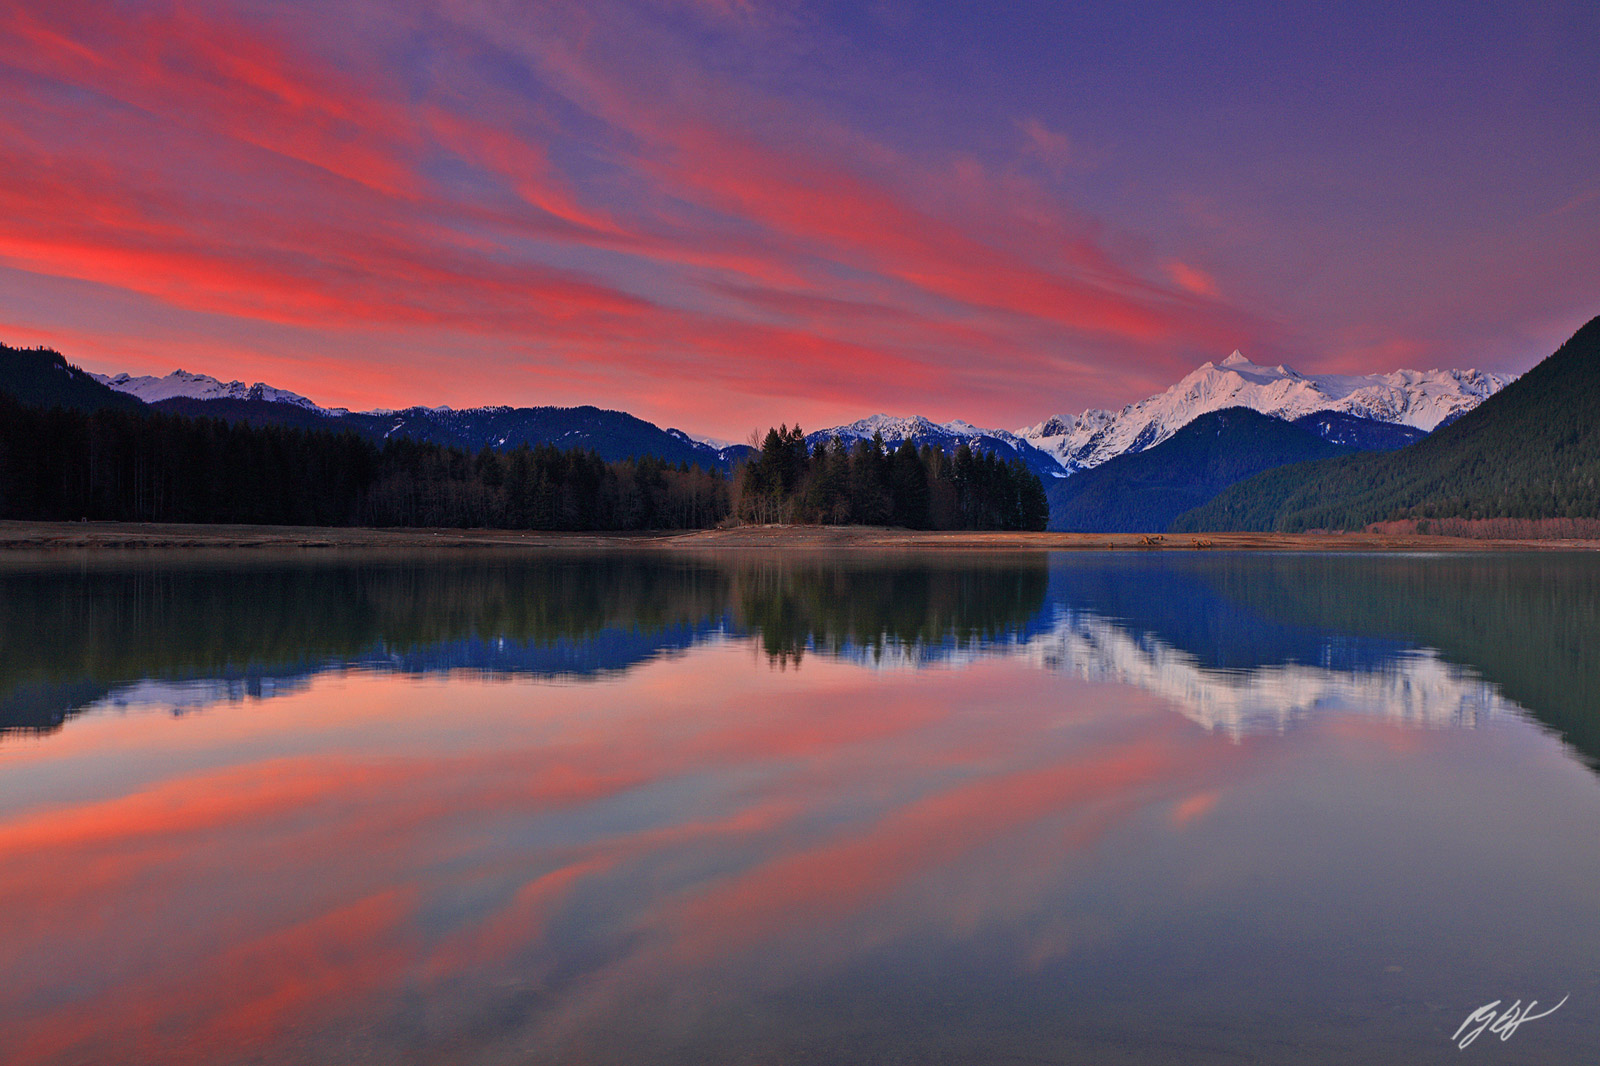 Sunset Mt Shuksan Reflected in Baker Lake in the Mt Baker-Snoqualmie National Forest in Washington